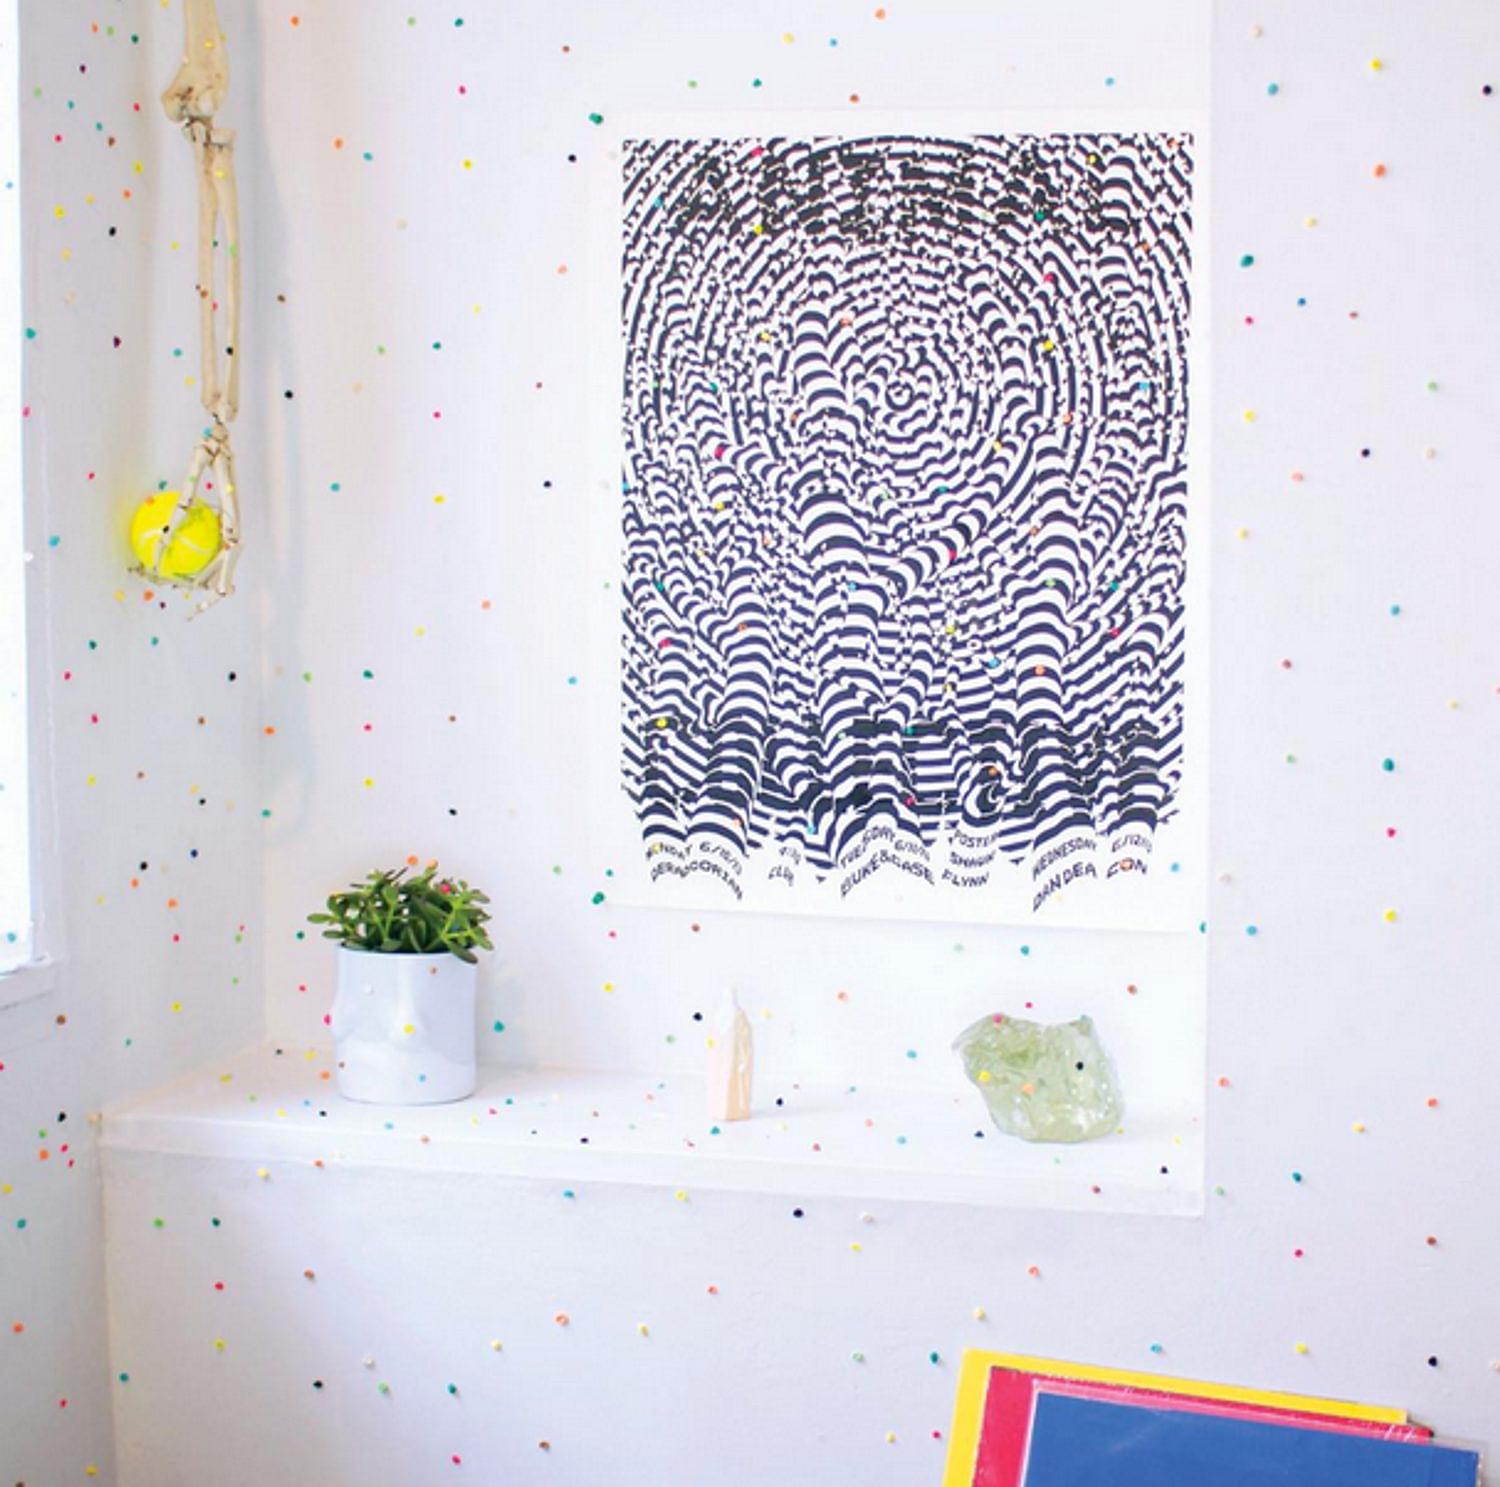 Animal Collective to release 3xLP live album ‘Live at 9:30’